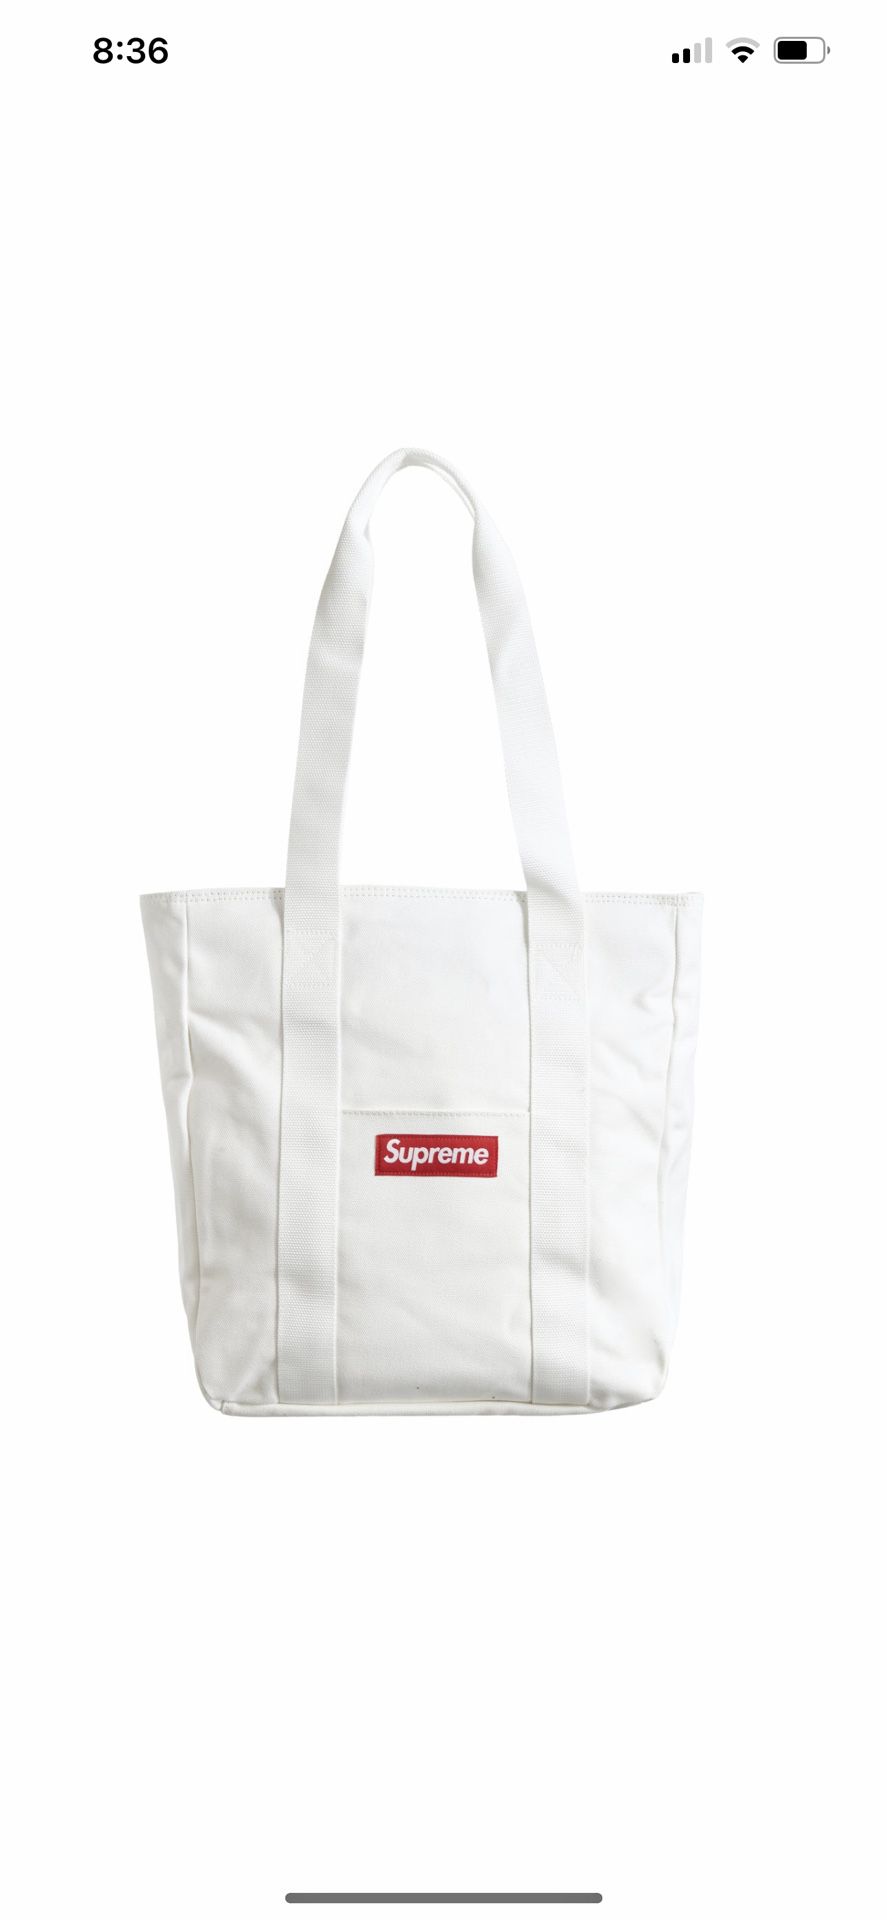 Brand New Supreme Bags For Sale